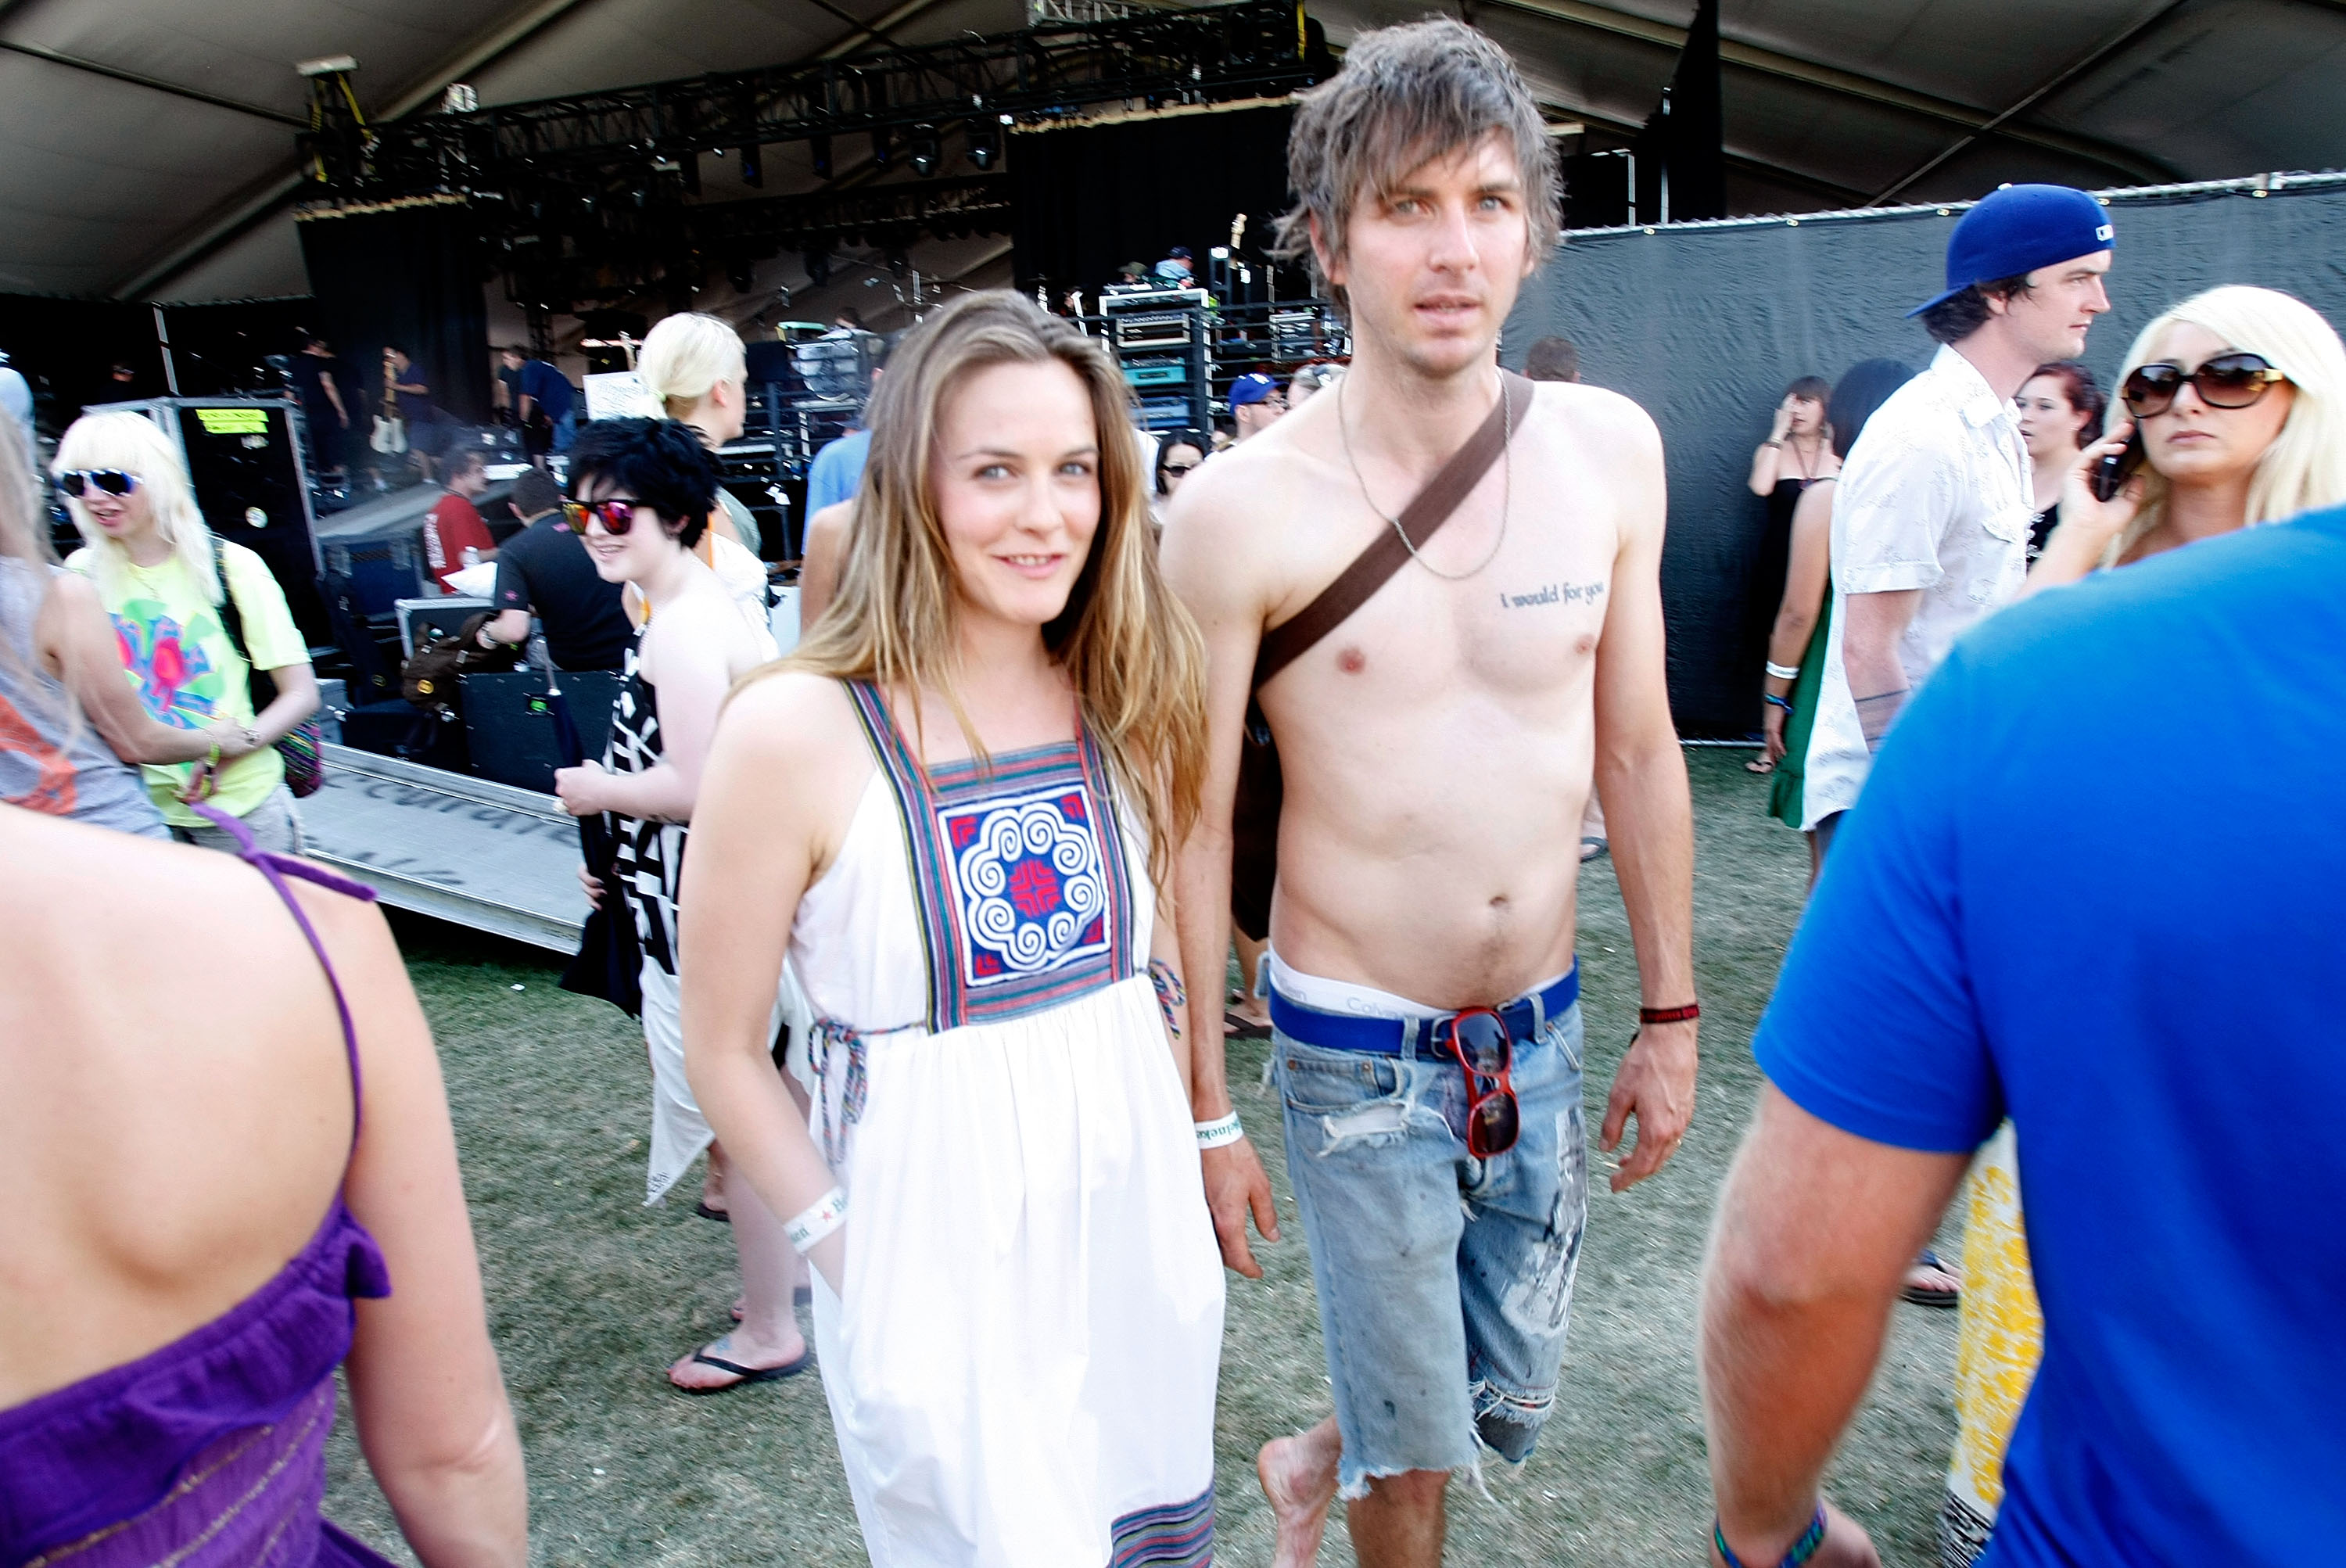 INDIO, CA - APRIL 26: Actress Alicia Silverstone with fiance Christopher Jarecki during day 2 of the Coachella Valley Music and Arts Festival at the Empire Polo Field on April 26, 2008 in Indio, California. (Photo by Michael Buckner/Getty Images)